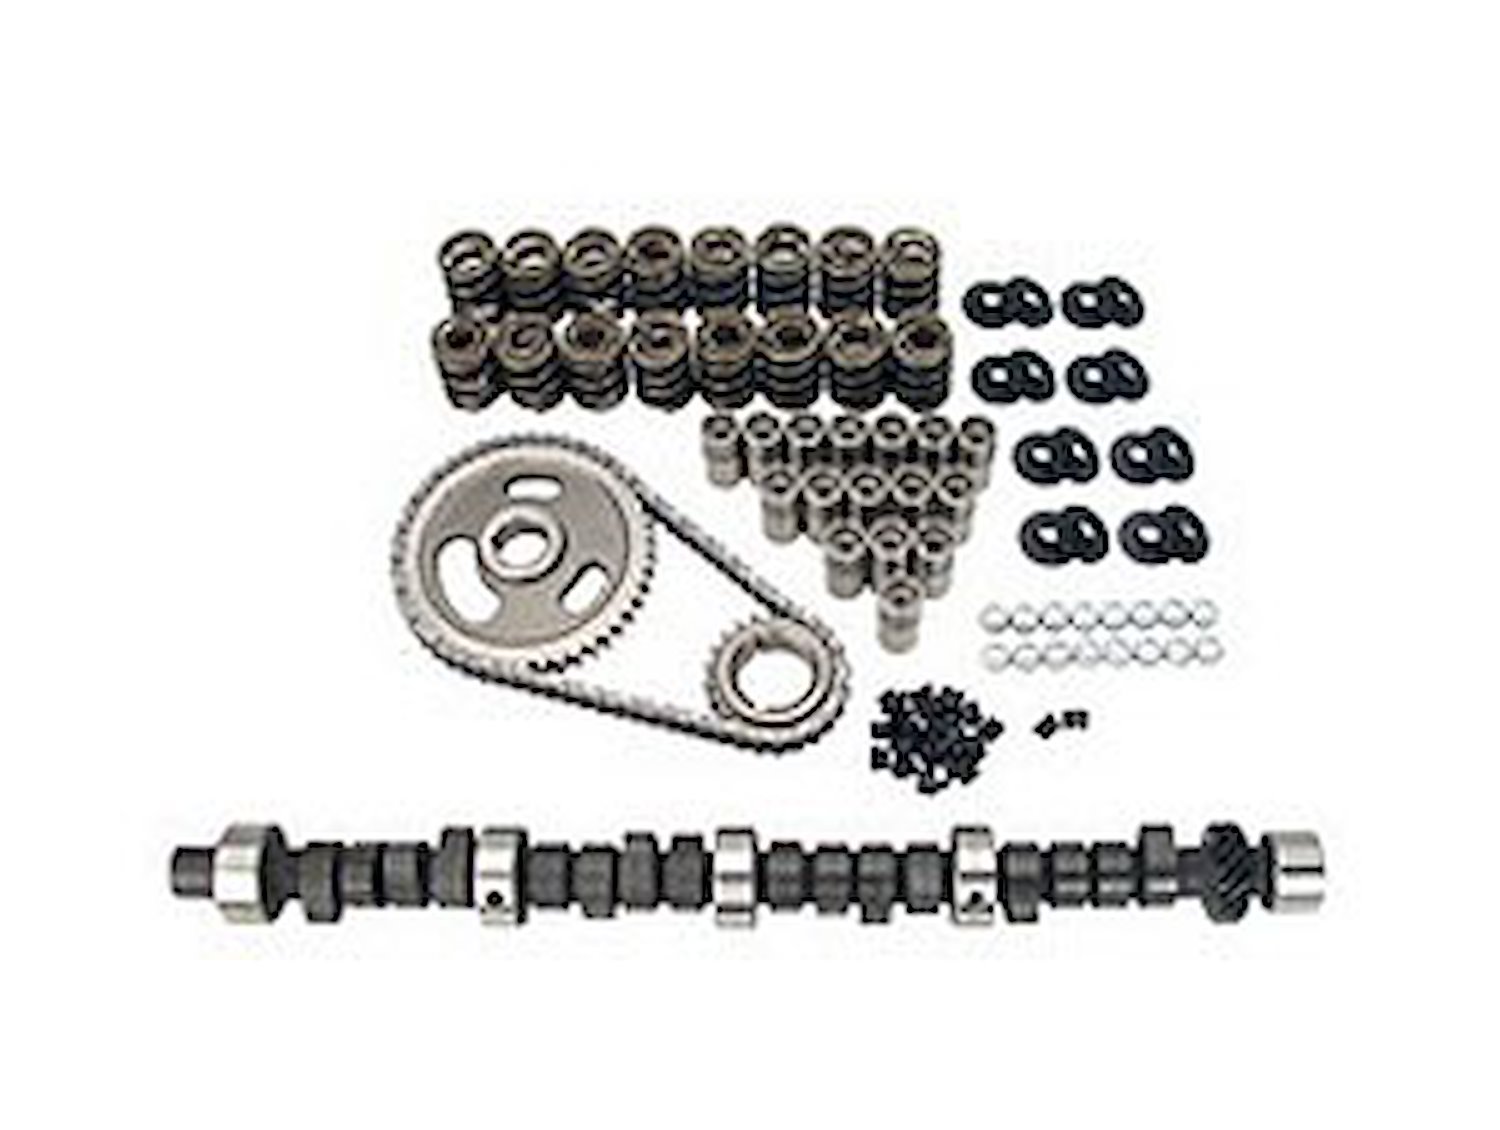 Xtreme Energy 294H Hydraulic Flat Tappet Camshaft Complete Kit Lift .519"/.524" Duration 294°/306° RPM Range 2800-6800